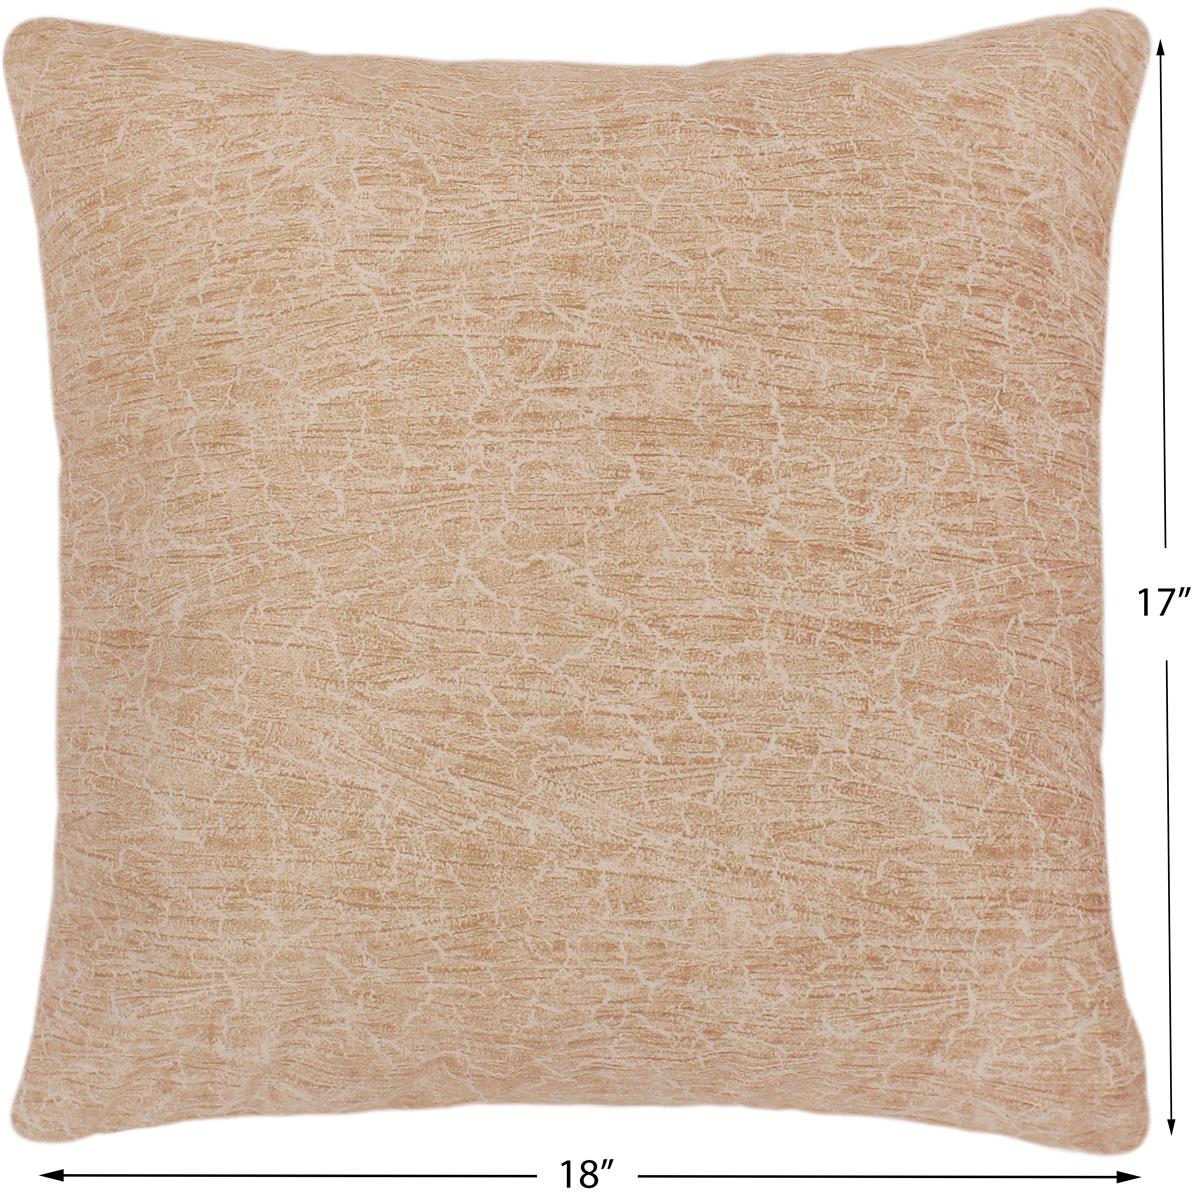 handmade  Pillow Ivory Brown Hand-Woven SQUARE SUEDE pillow